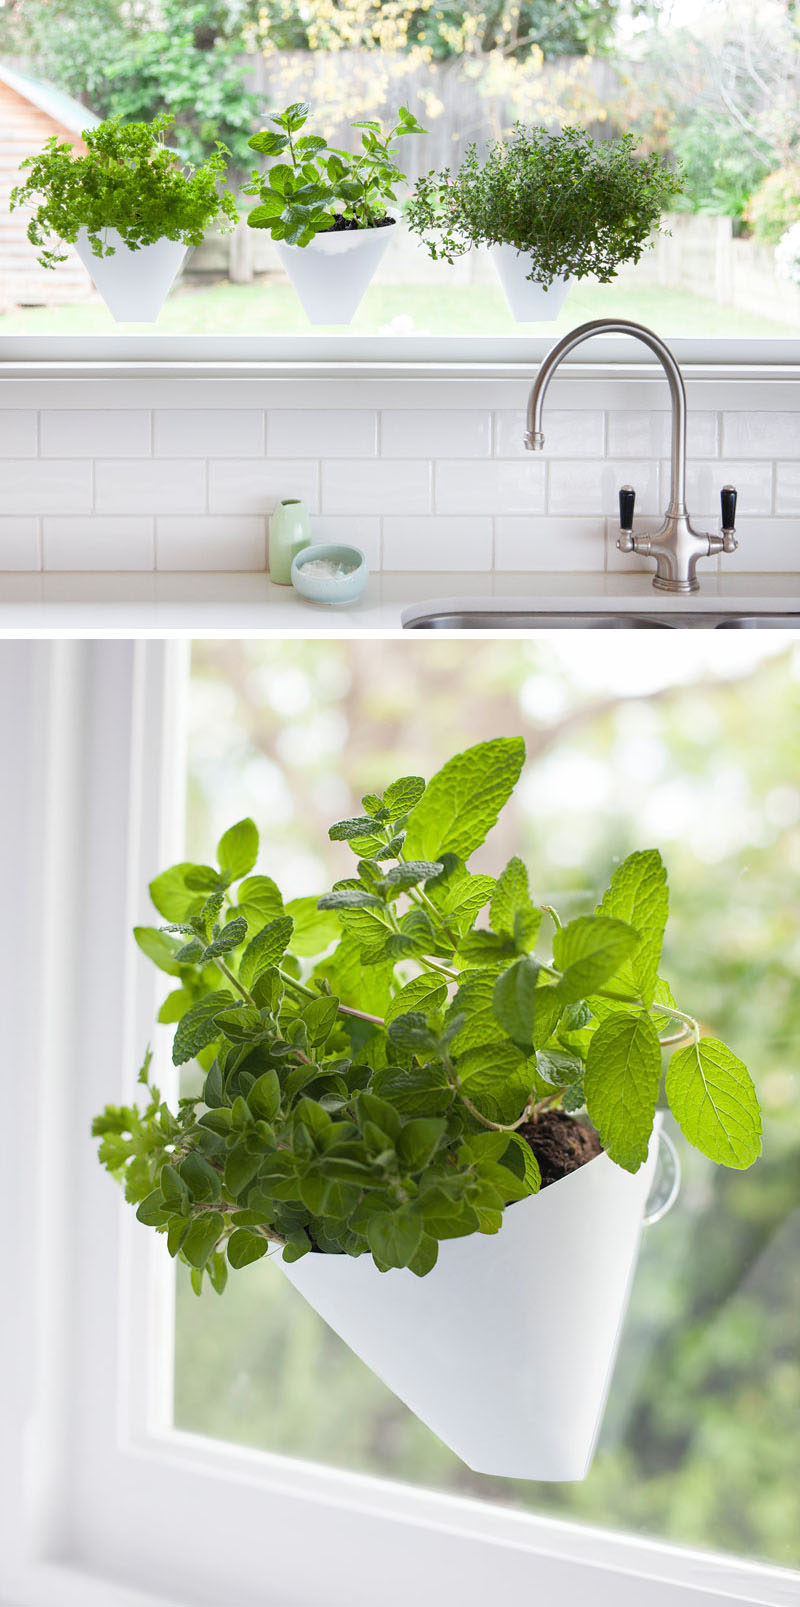 Indoor Garden Ideas - Hang Your Plants From The Ceiling & Walls // These planters suction cup to the window.